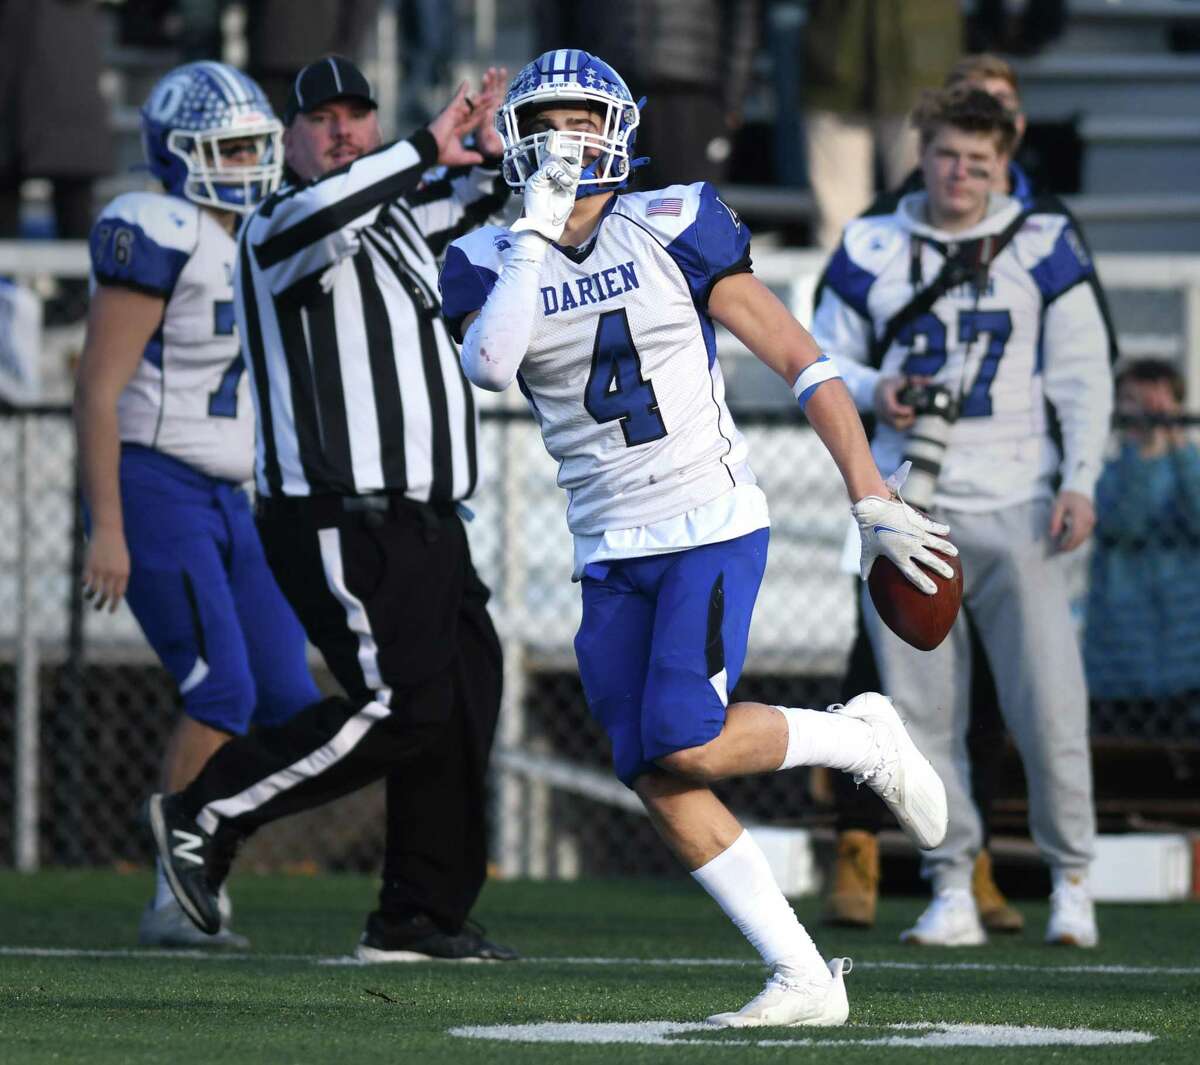 Darien defensive back Joe Cesare (4) celebrates after one of his three interceptions in Sunday’s win over New Canaan in the CIAC Class LL semifinal.